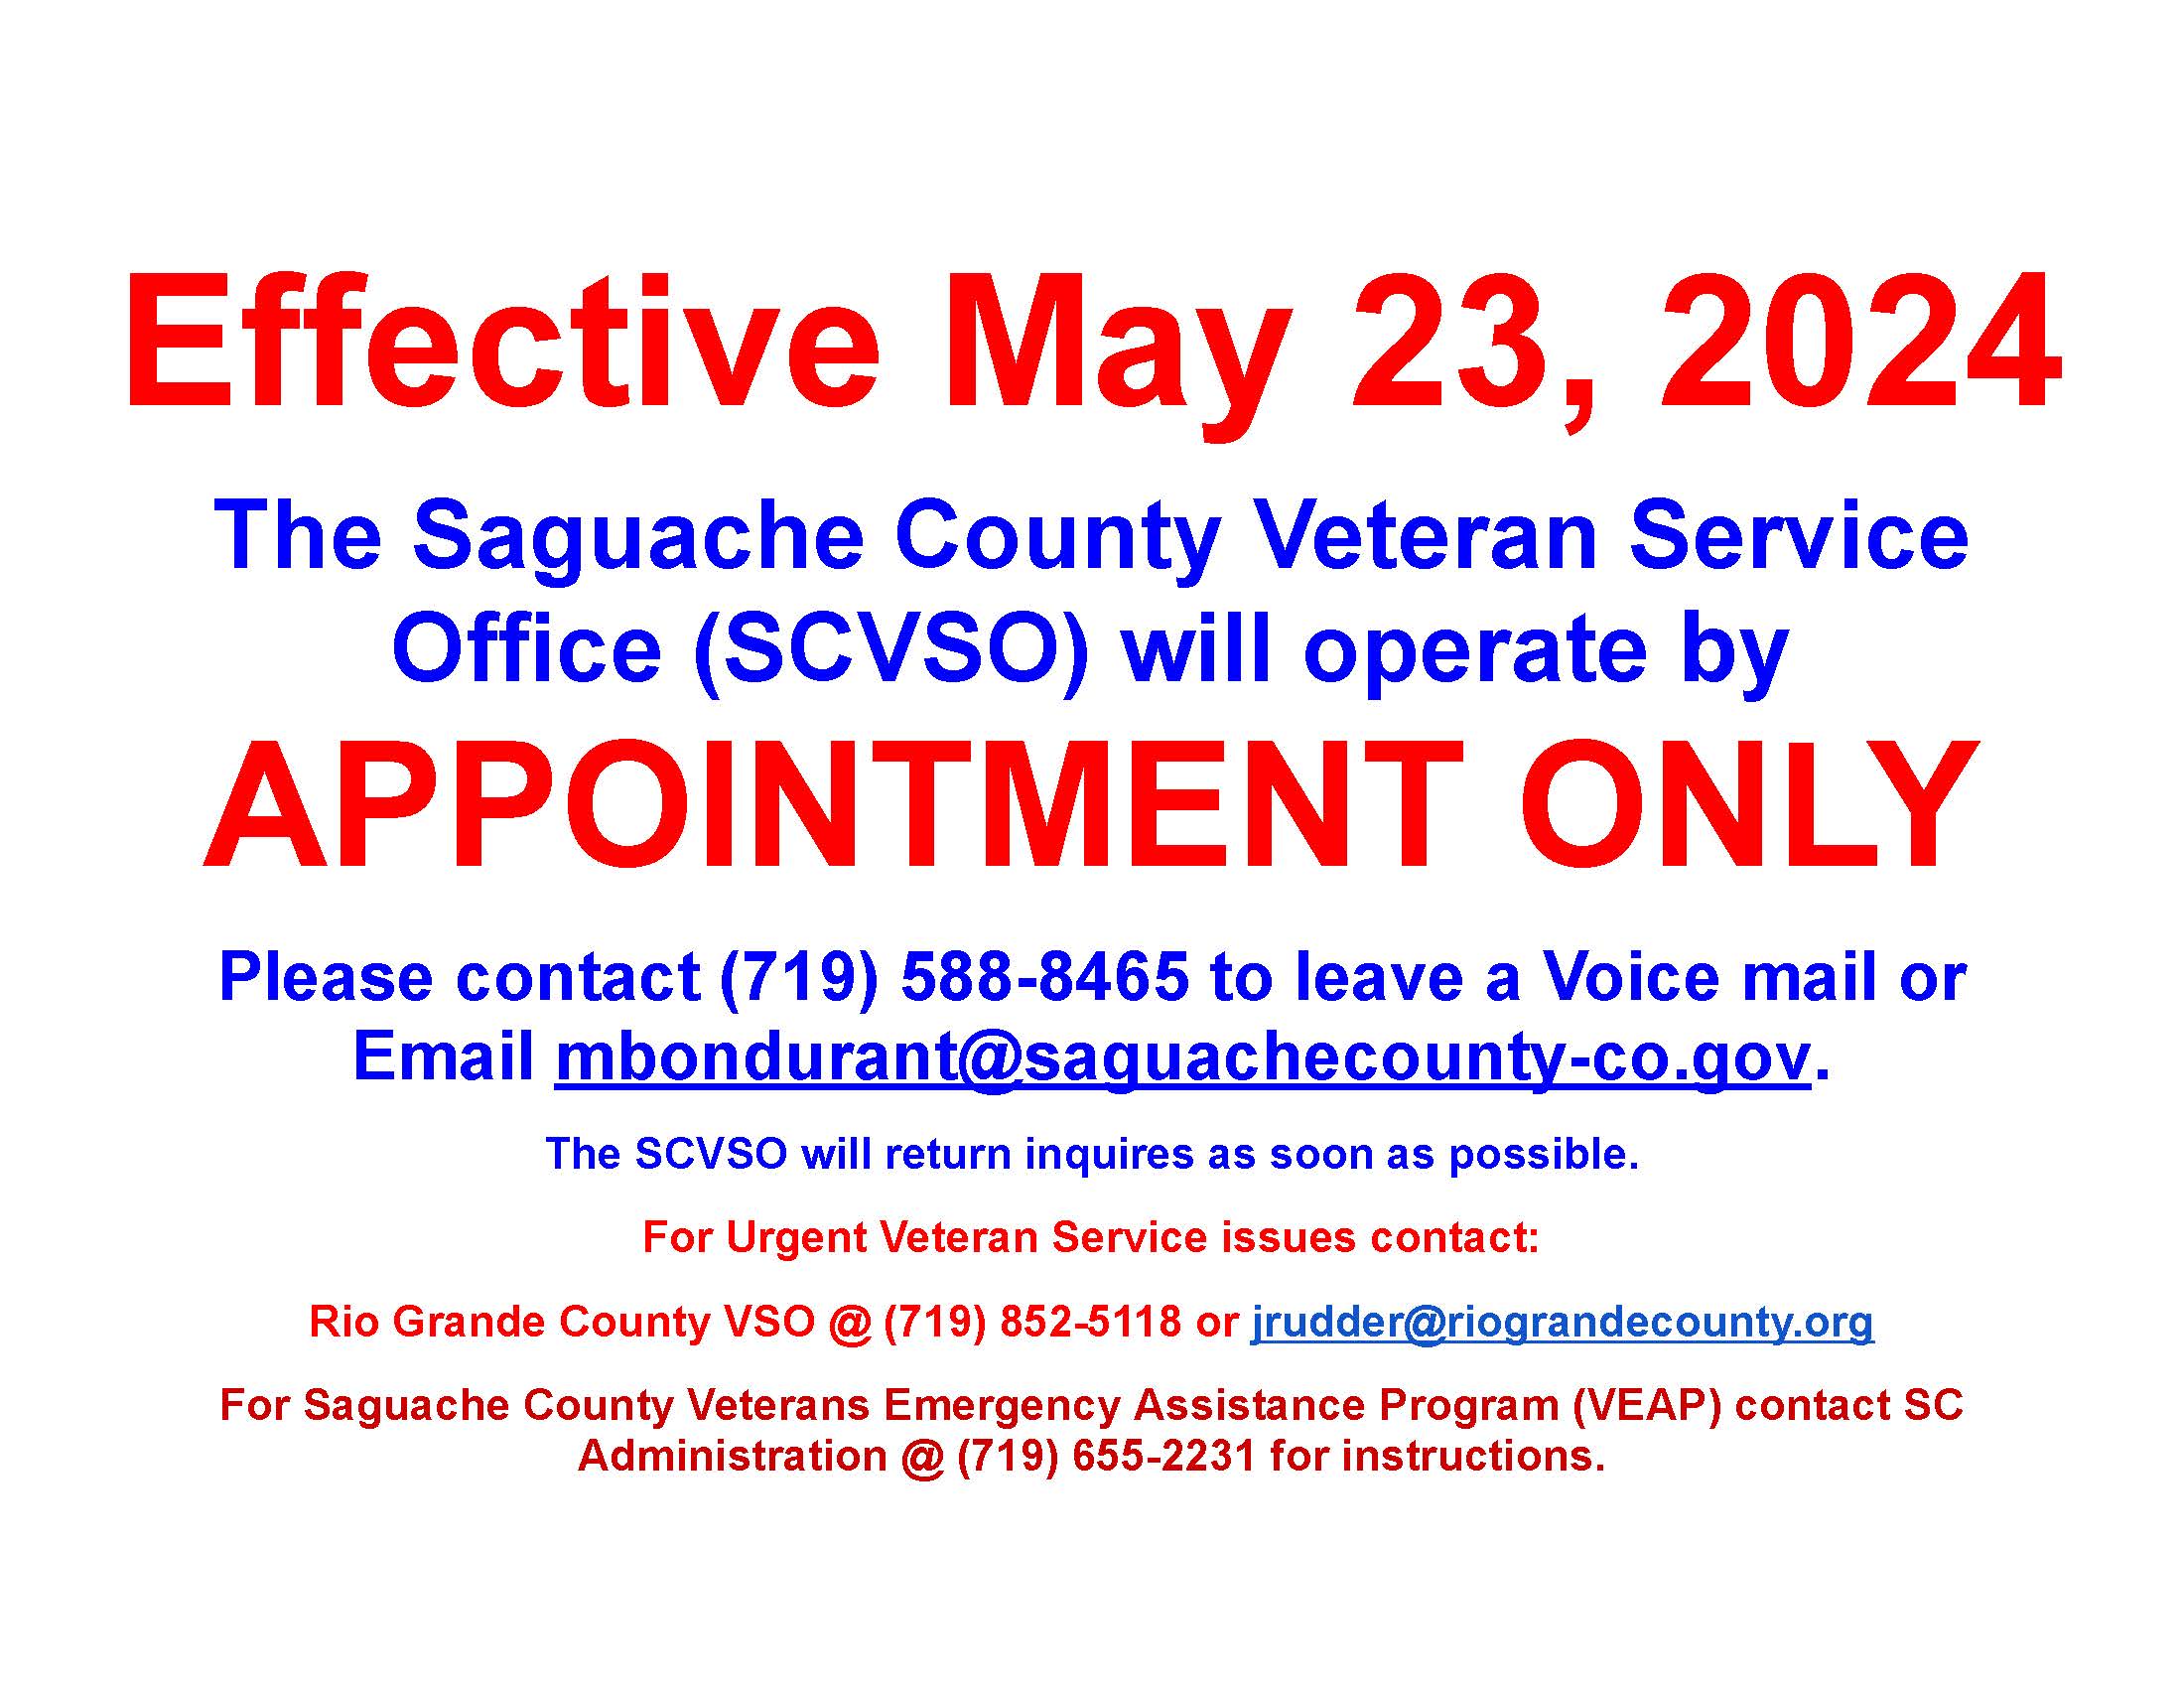 An announcement poster with a red background and bold white and yellow text. It reads: ‘Effective May 23, 2024, The Saguache County Veteran Service Office (SCVSO) will operate by APPOINTMENT ONLY. Please contact (719) 588-8465 to leave a voicemail or email mbondurant@saguachecounty-co.gov. The SCVSO will return inquiries as soon as possible. For Urgent Veteran Service issues, contact the Rio Grande County VSO at (719) 852-5118 or jrodder@riograndecounty.org. For Saguache County Veterans Emergency Assistance